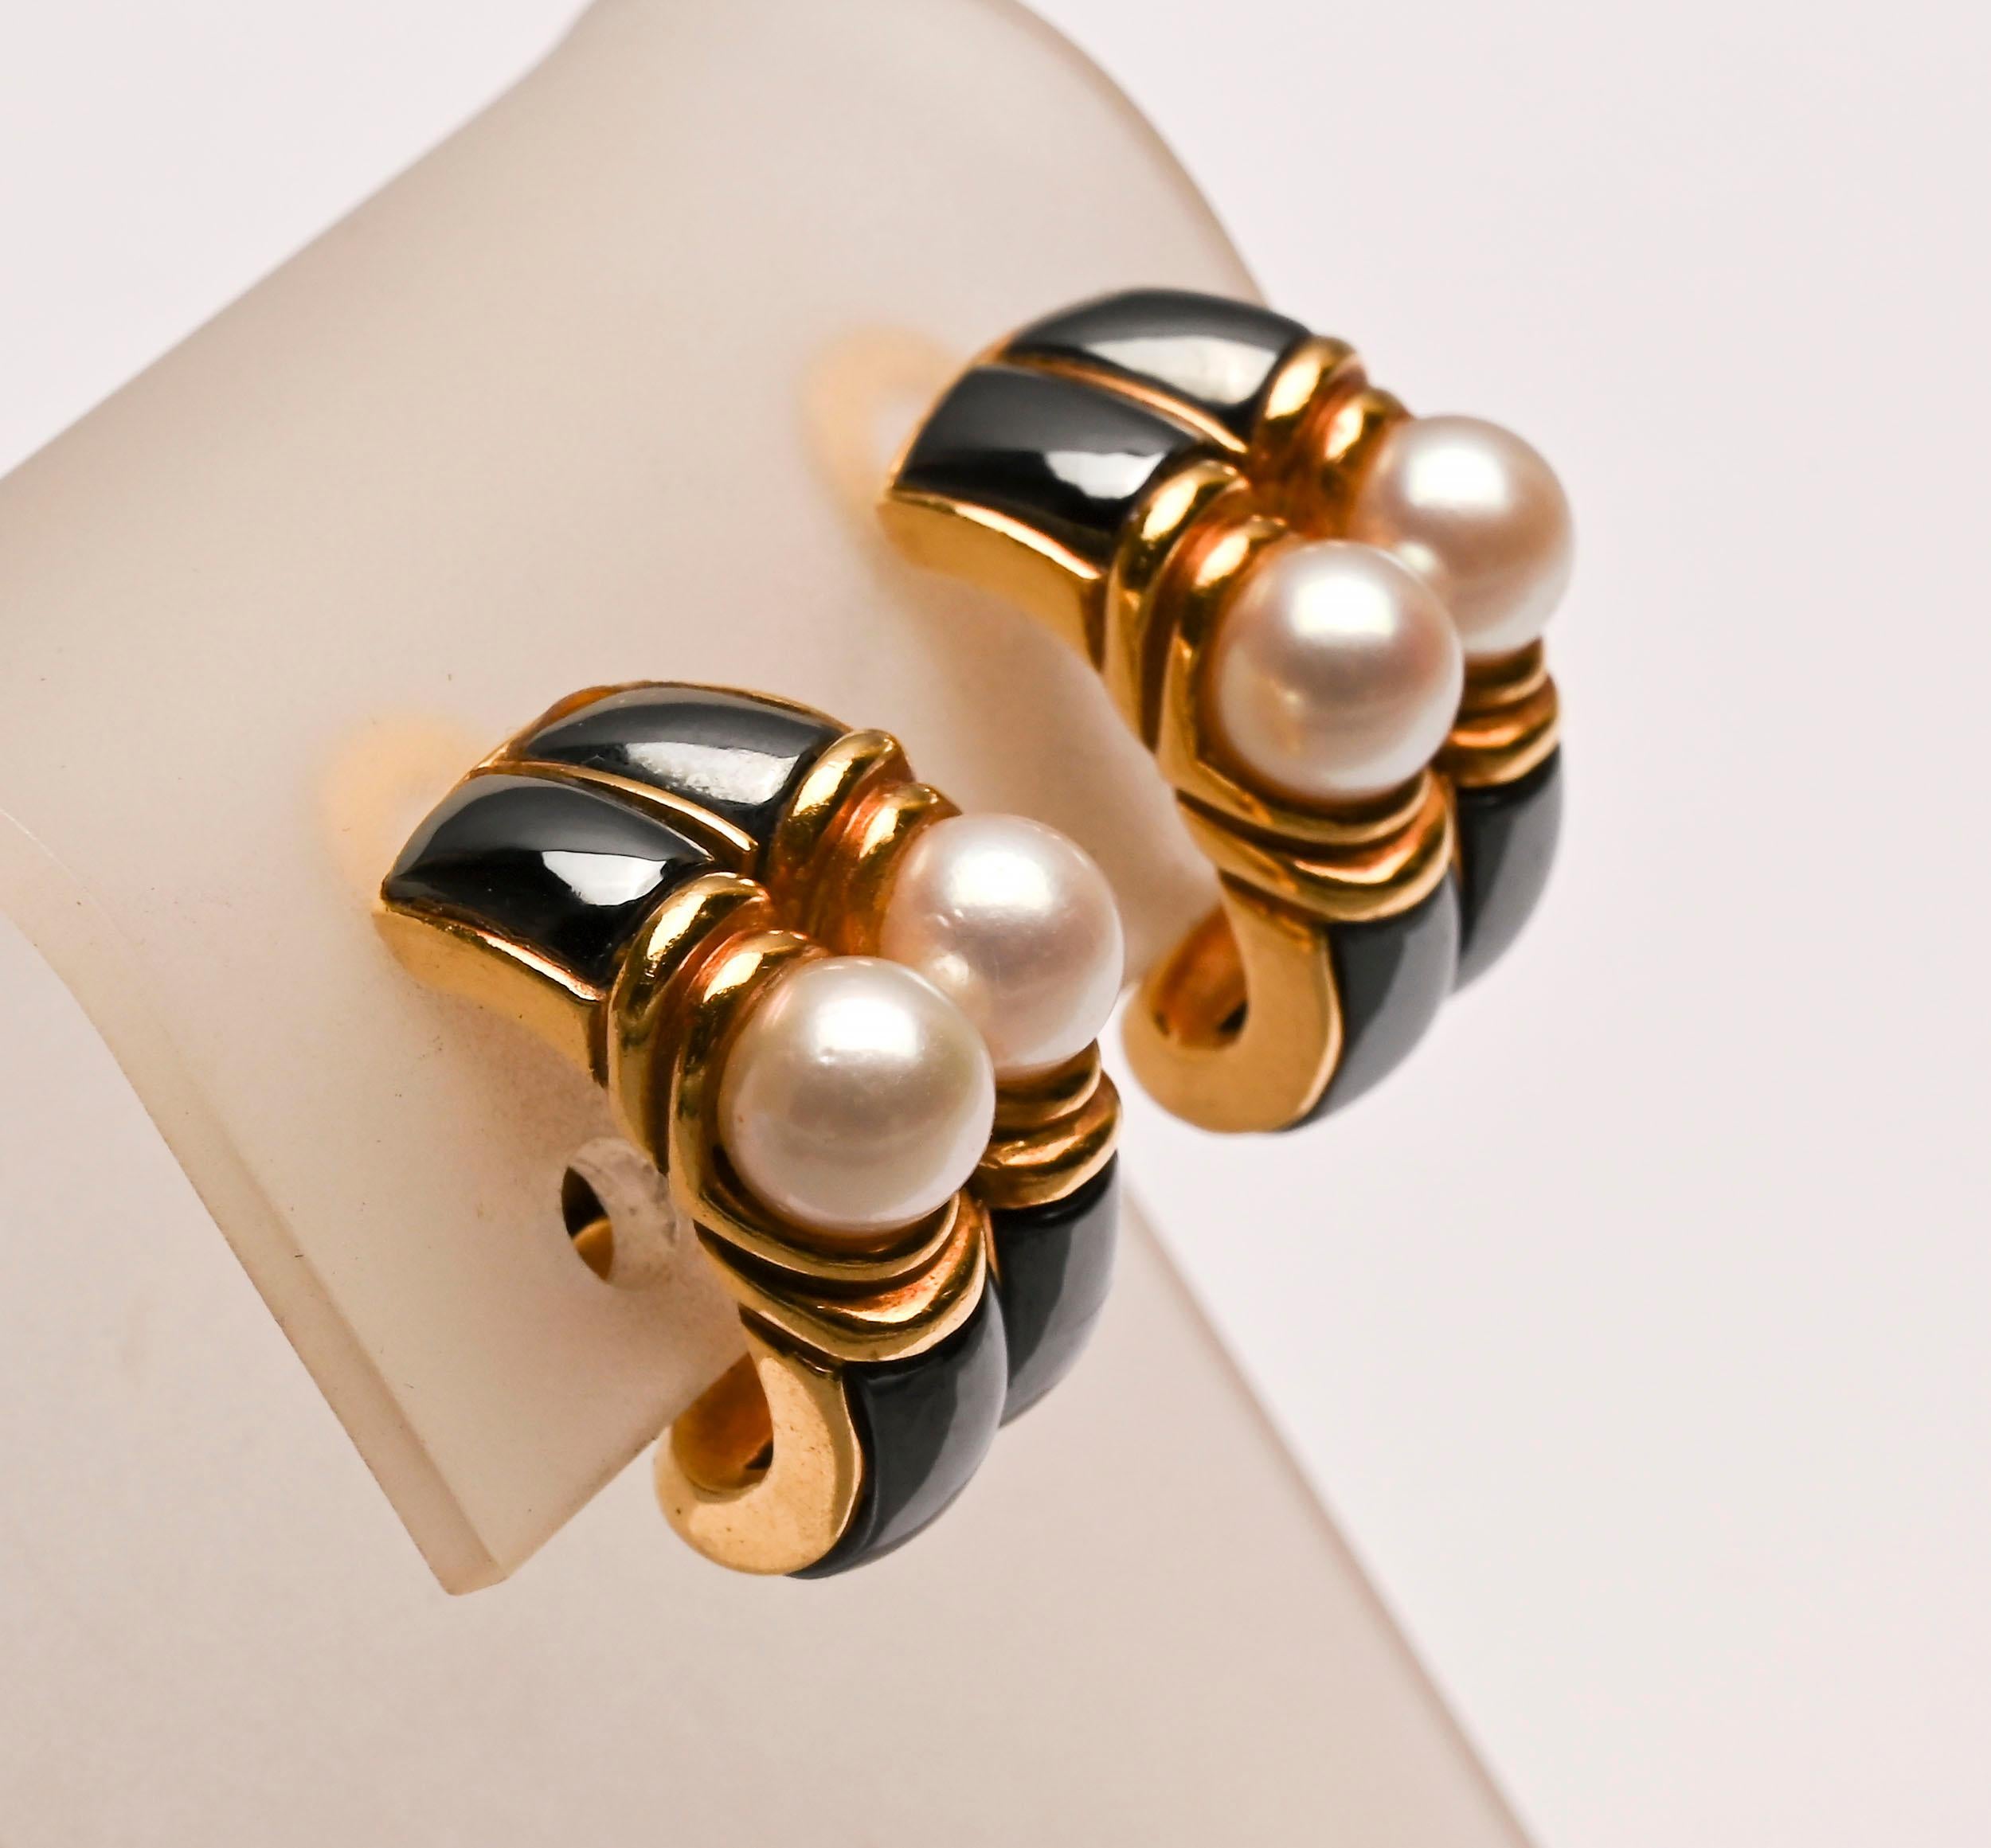 Sophisticated and sporty pearl and hematite earrings by Bulgari. Each earring has two pearls that are approximately 6.5mm in size. They are cradled in a two part band of gold. Rectangular plaques of hematite are above and below. Clip backs can be